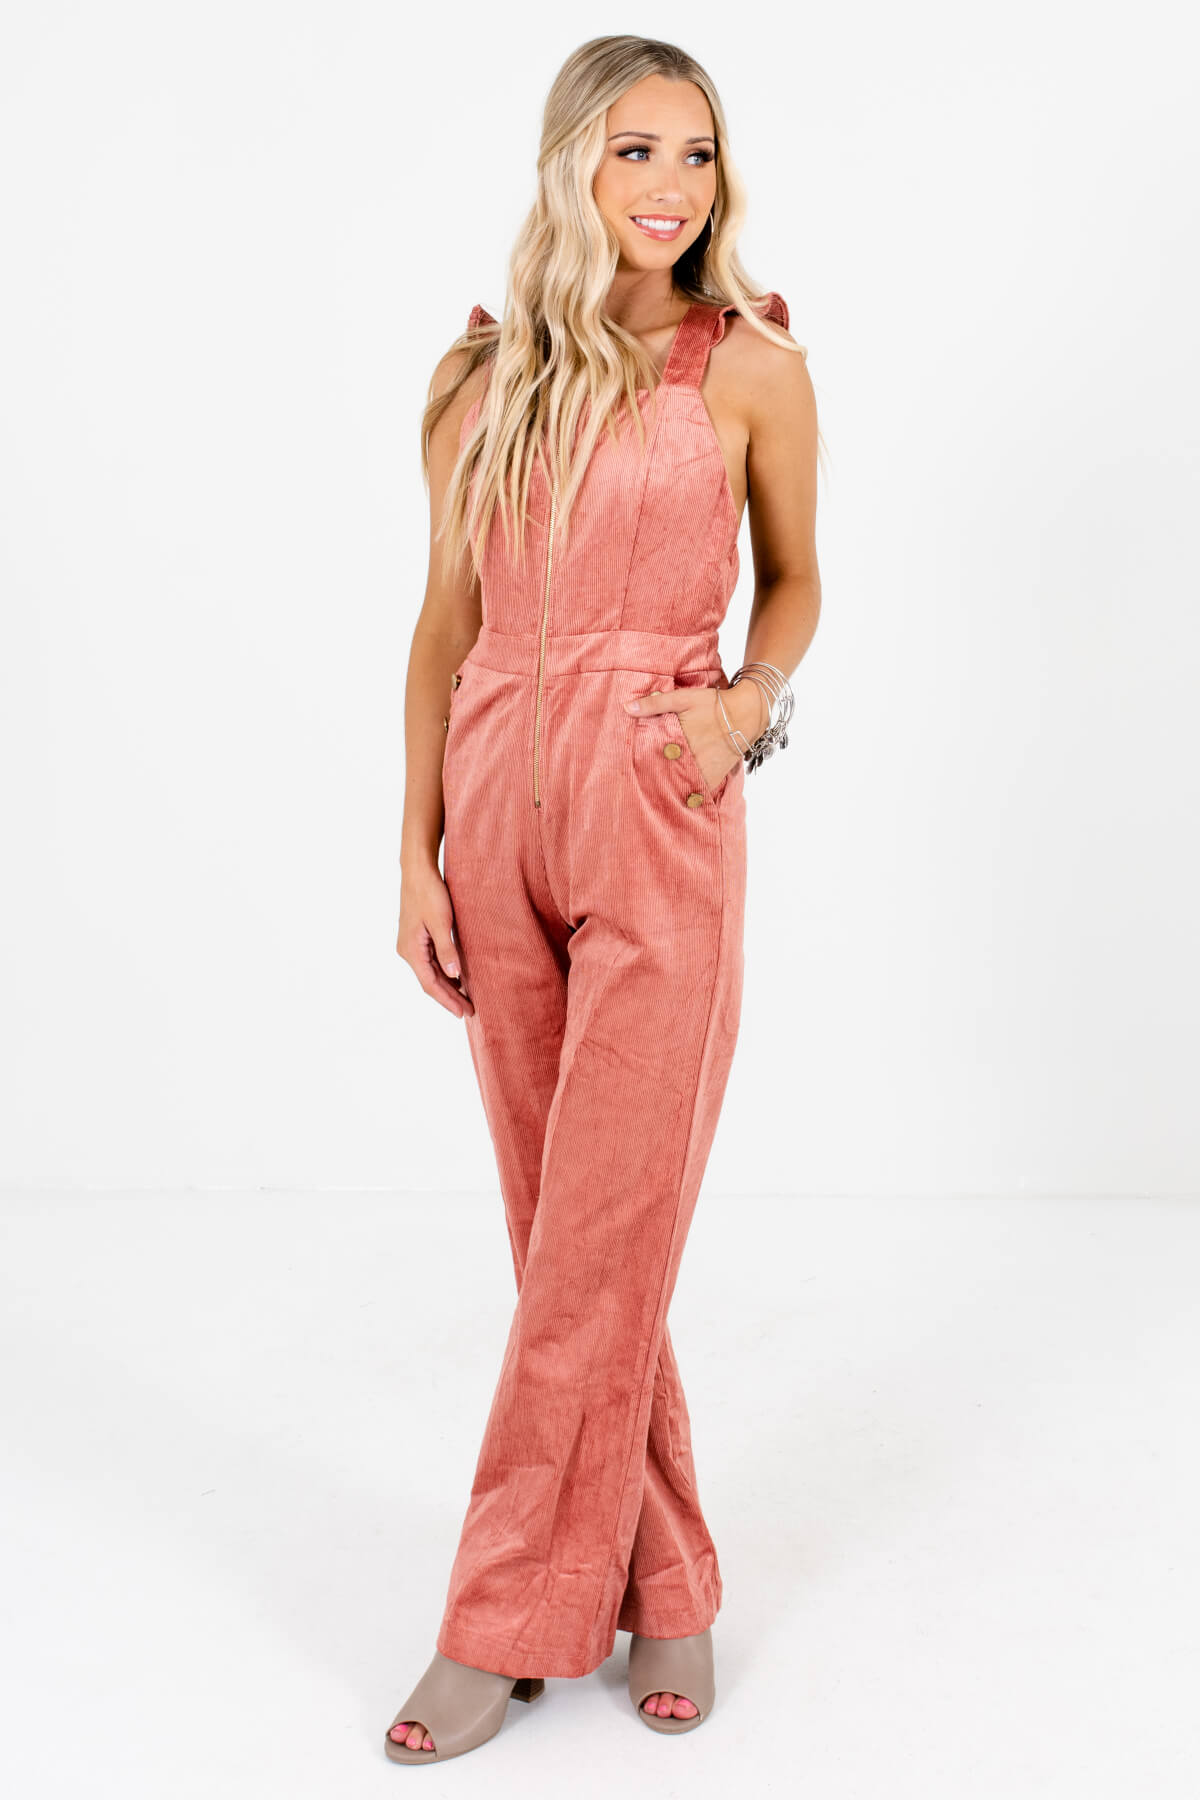 Women's Pink Corduroy Boutique Jumpsuits with Pockets